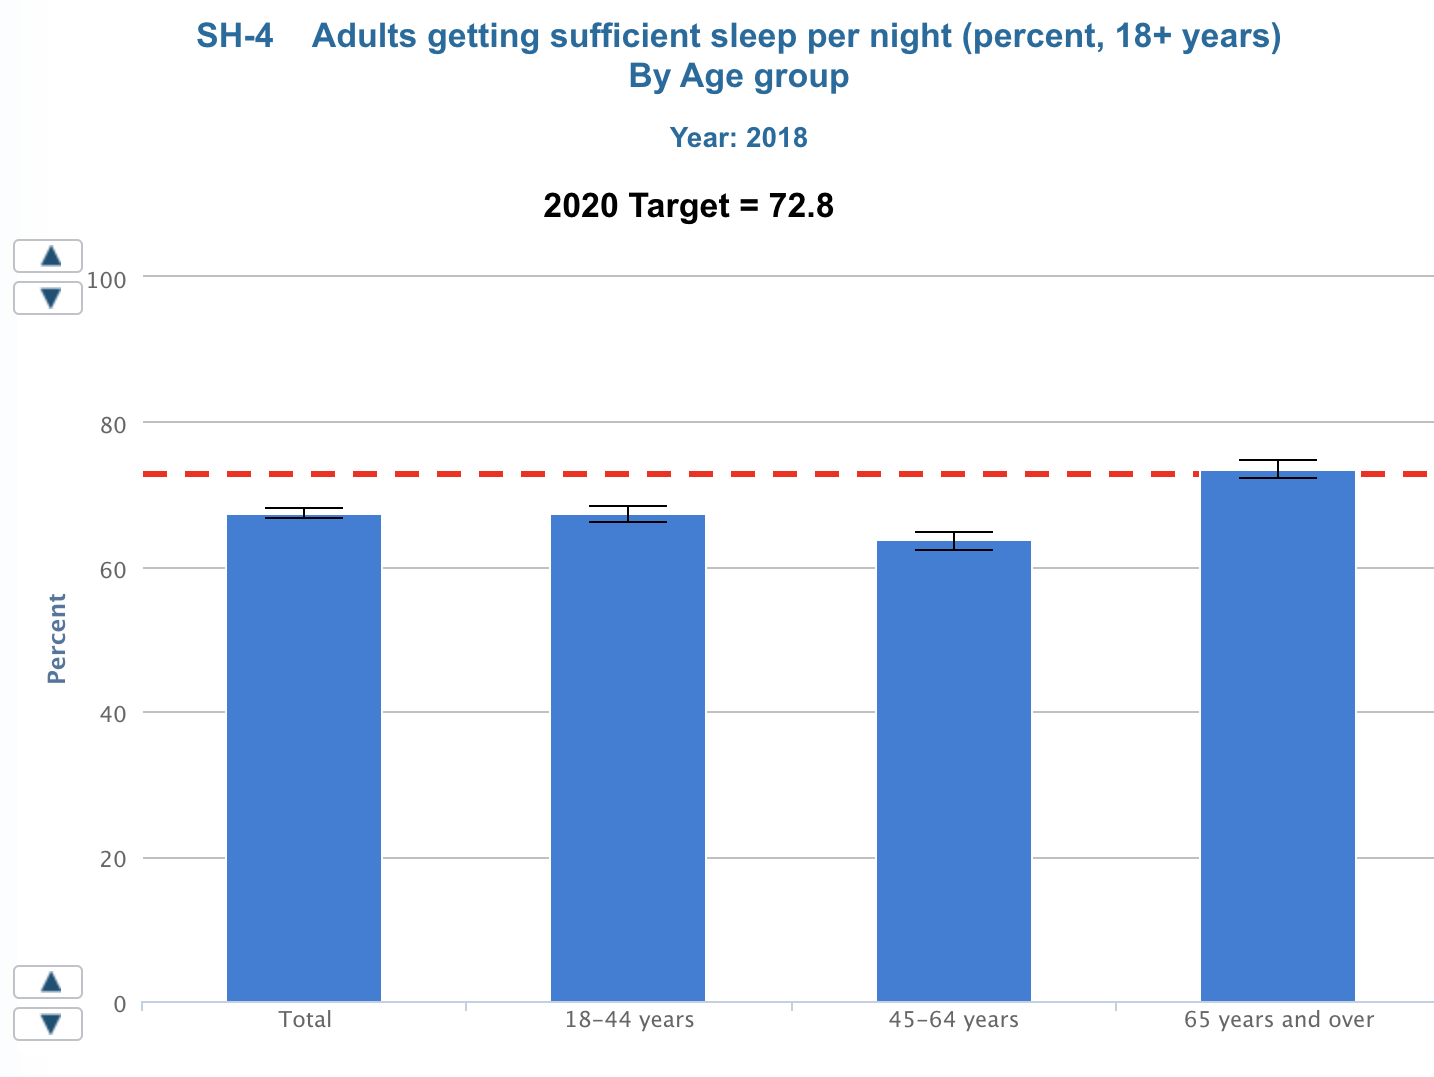 Adults are getting enough sleep